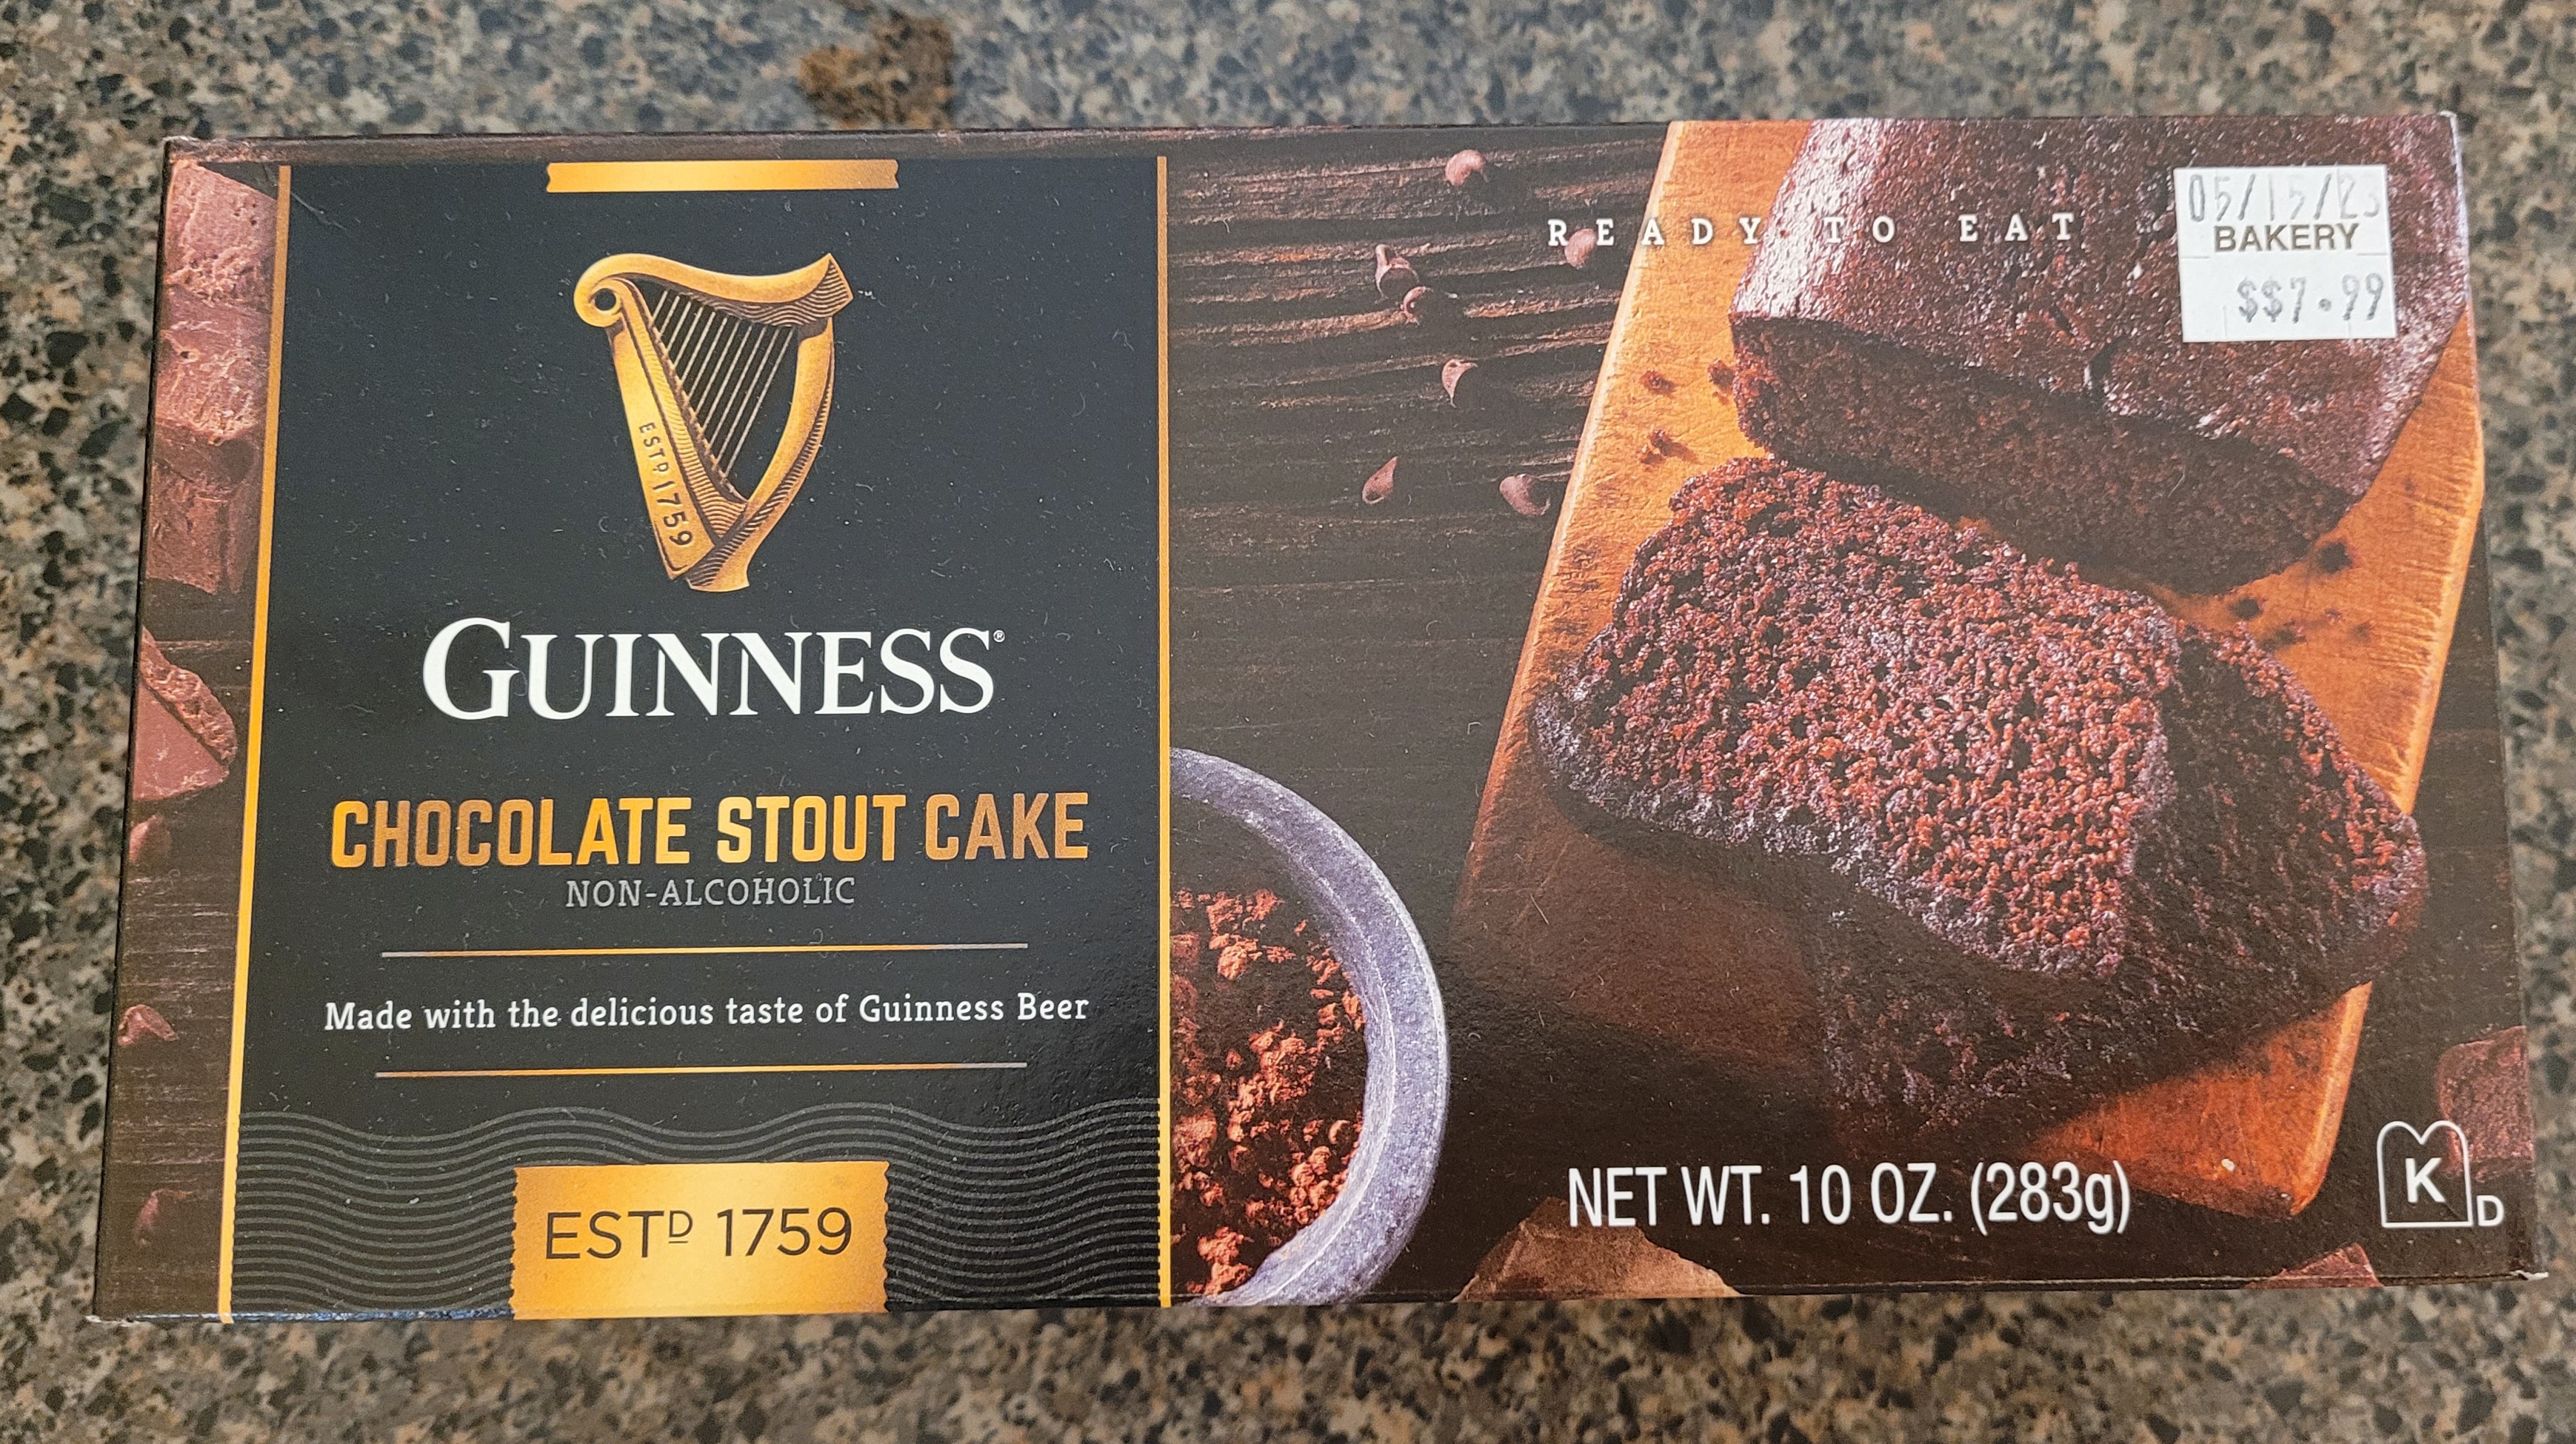 A box of Guinness chocolate stout cake